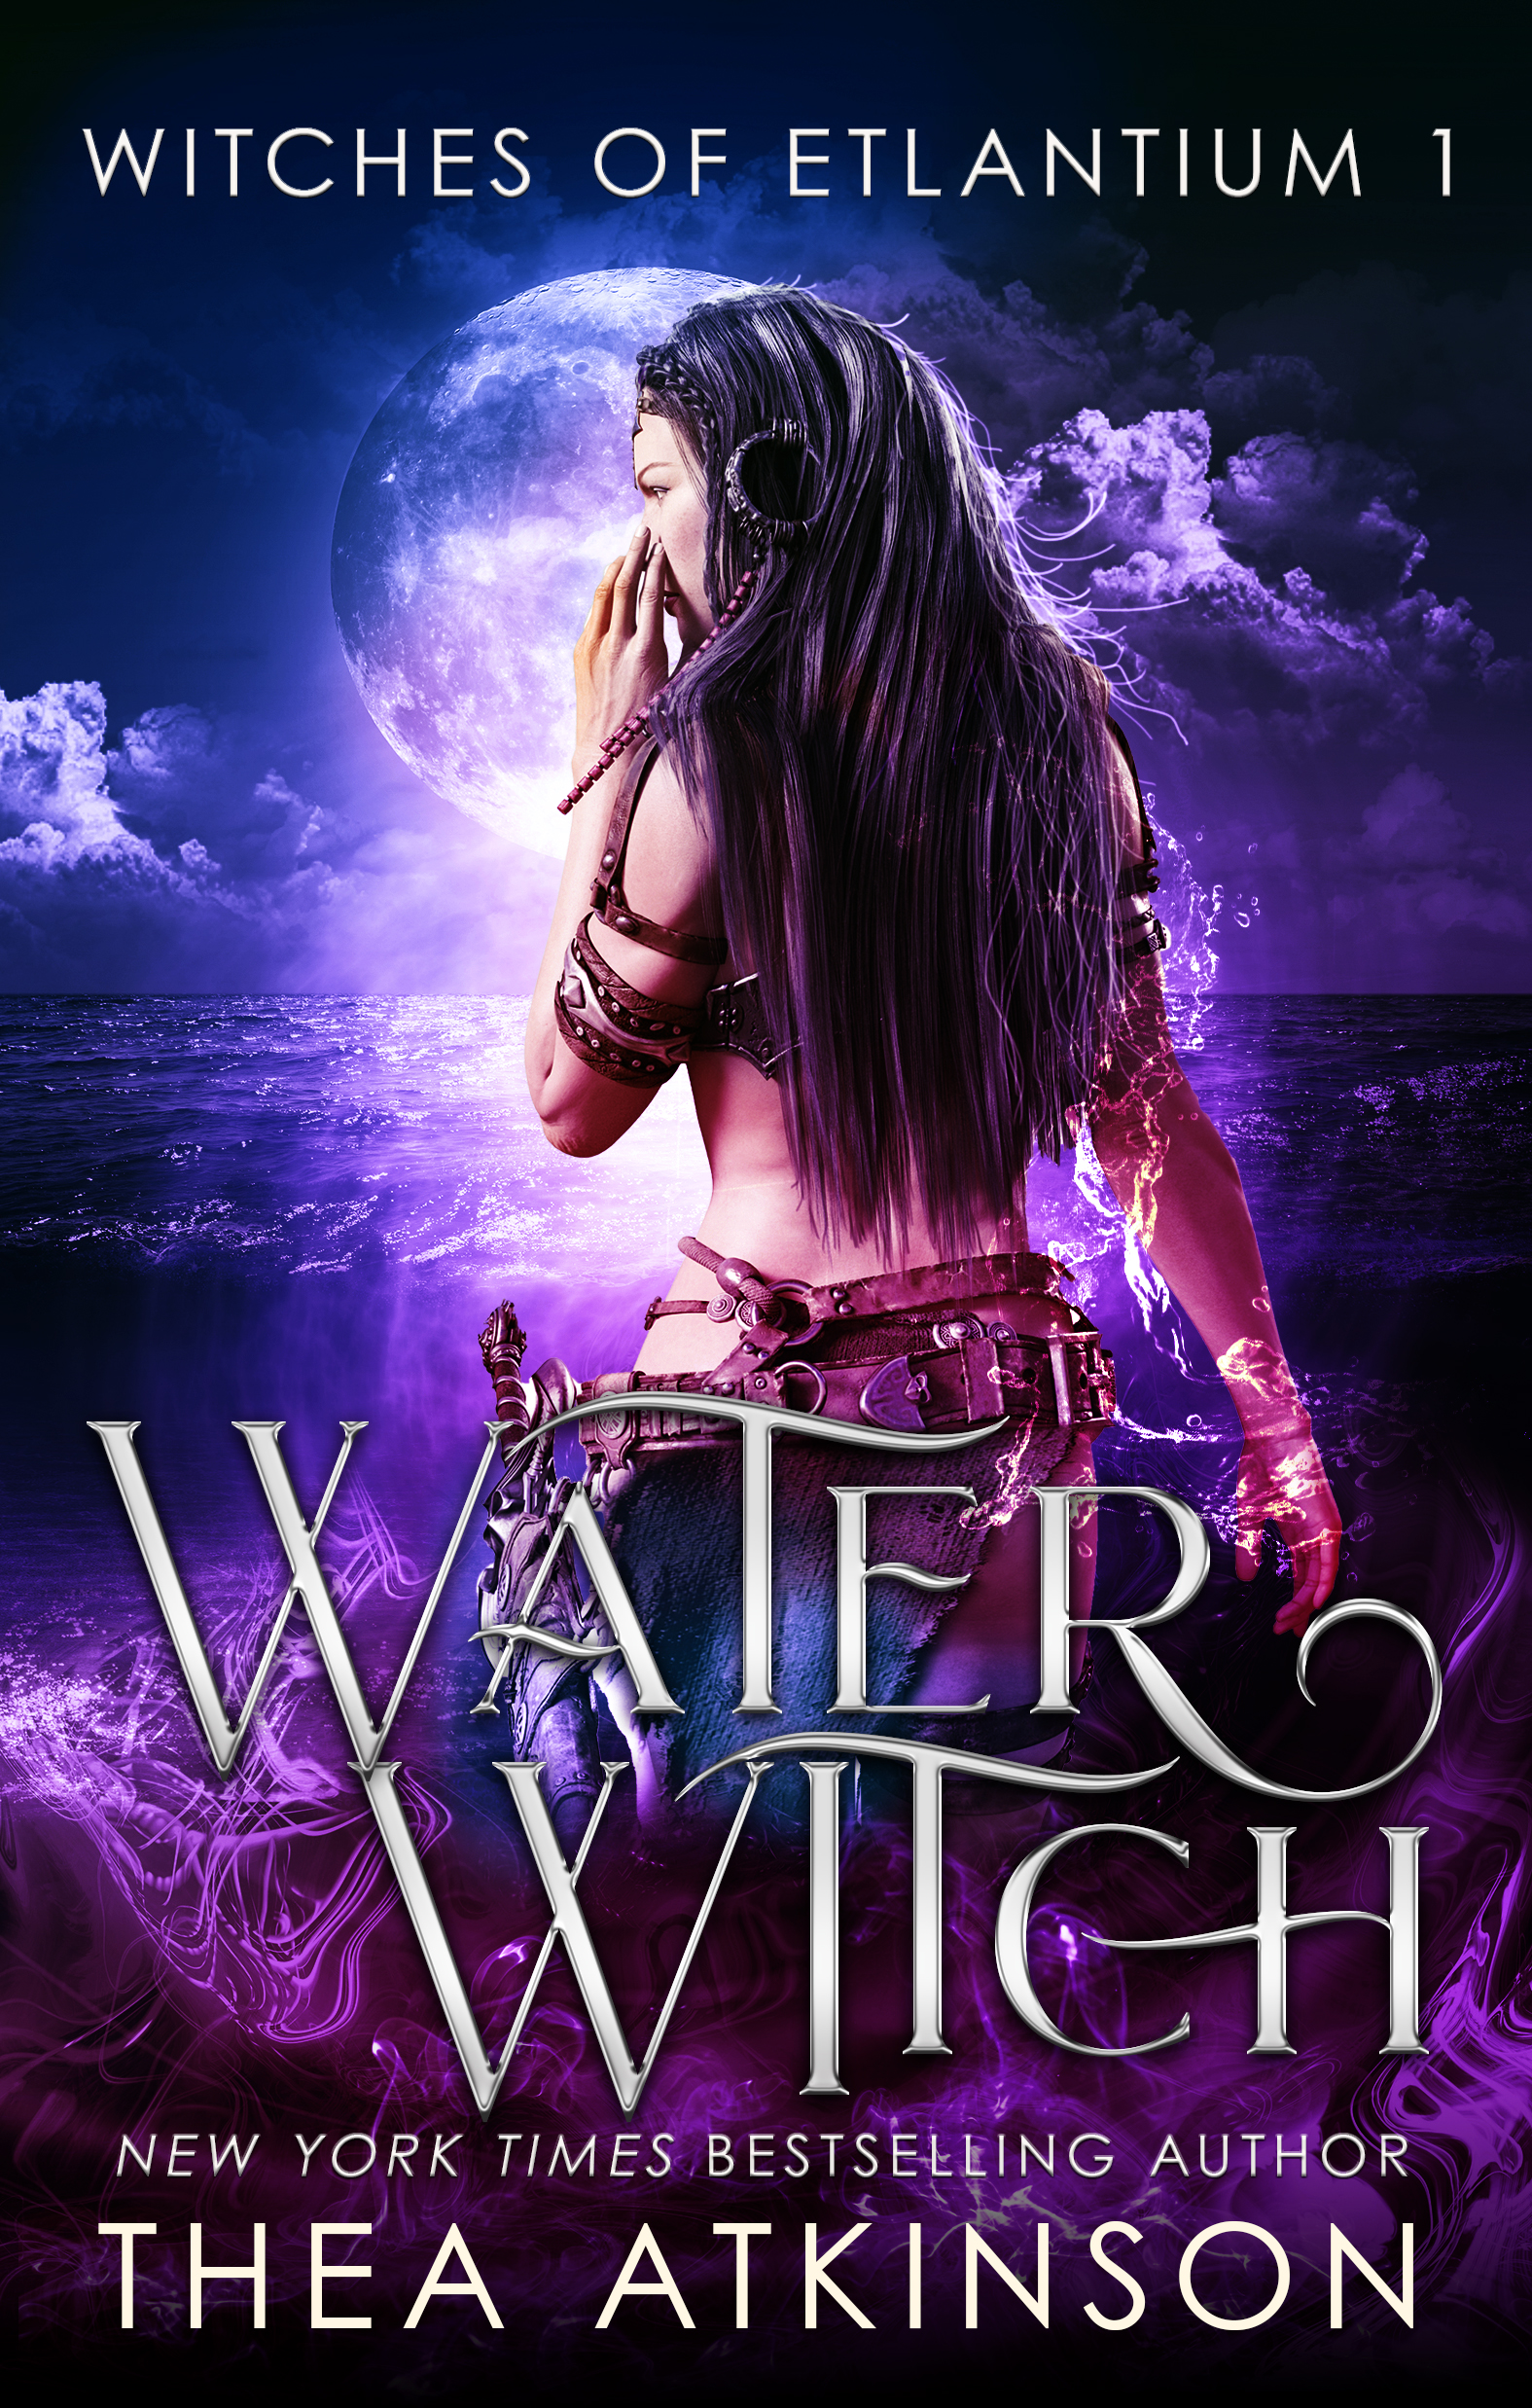 Water Witch: a new adult urban fantasy series